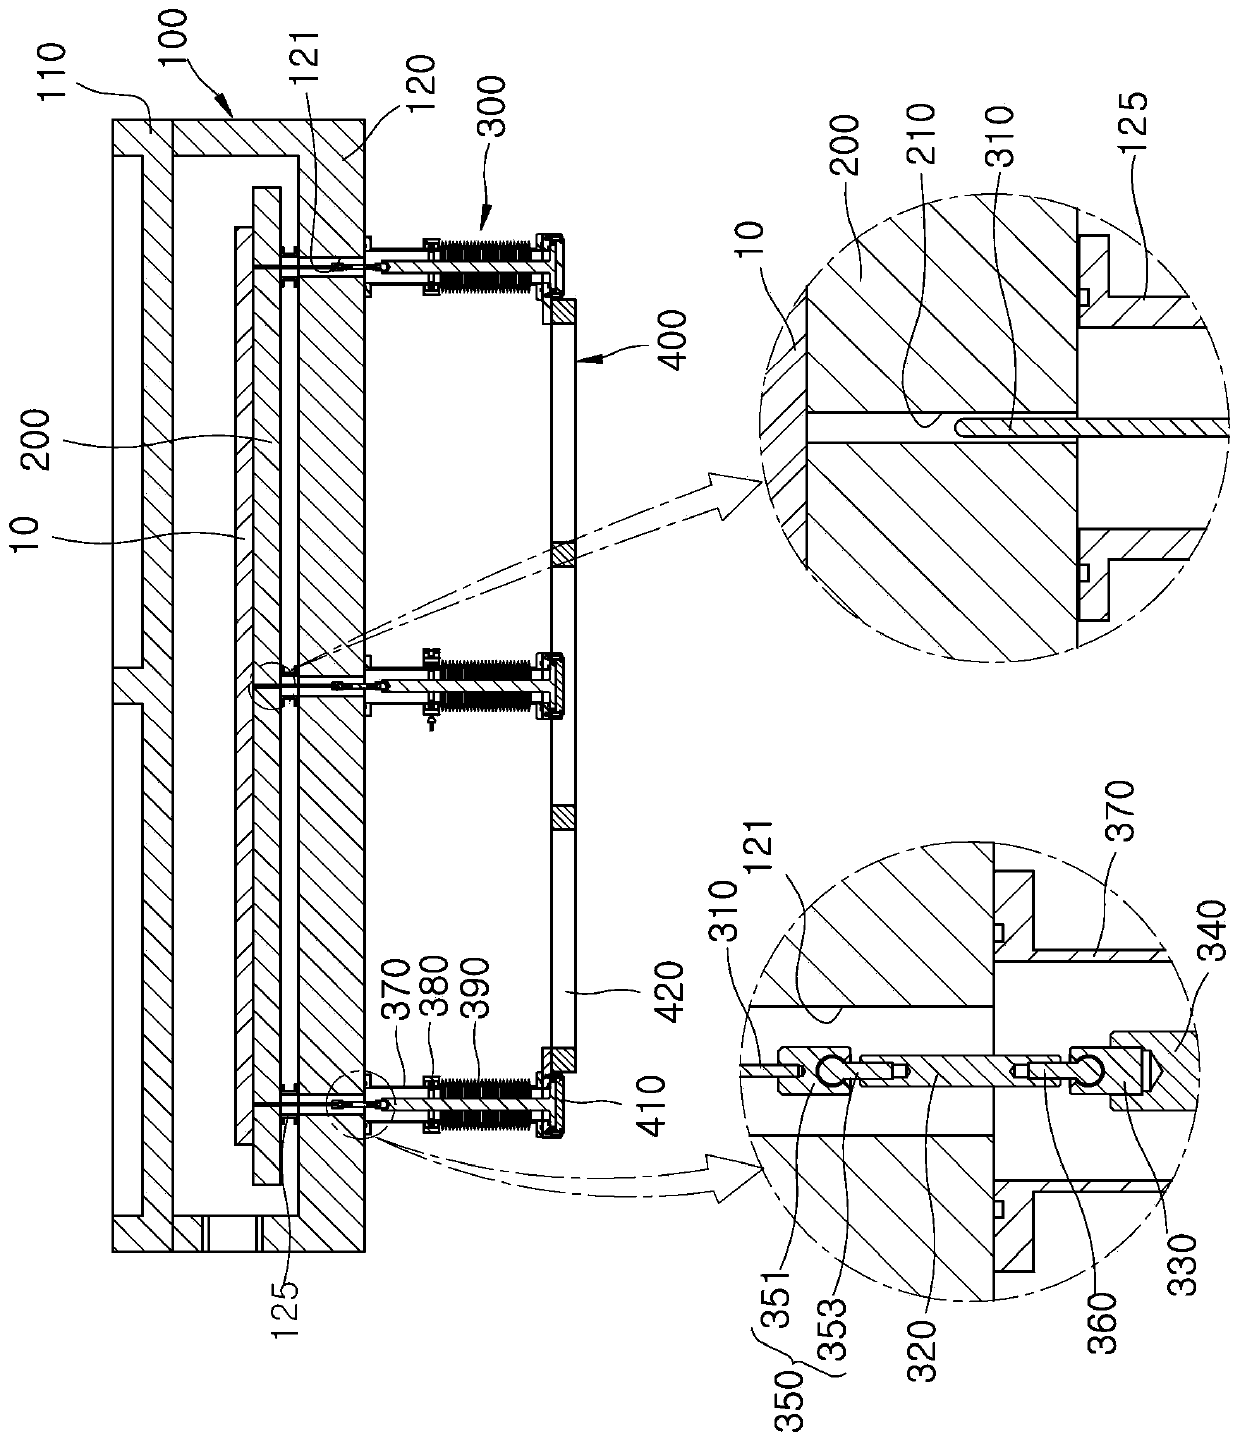 Substrate handling apparatus with lift pin assembly